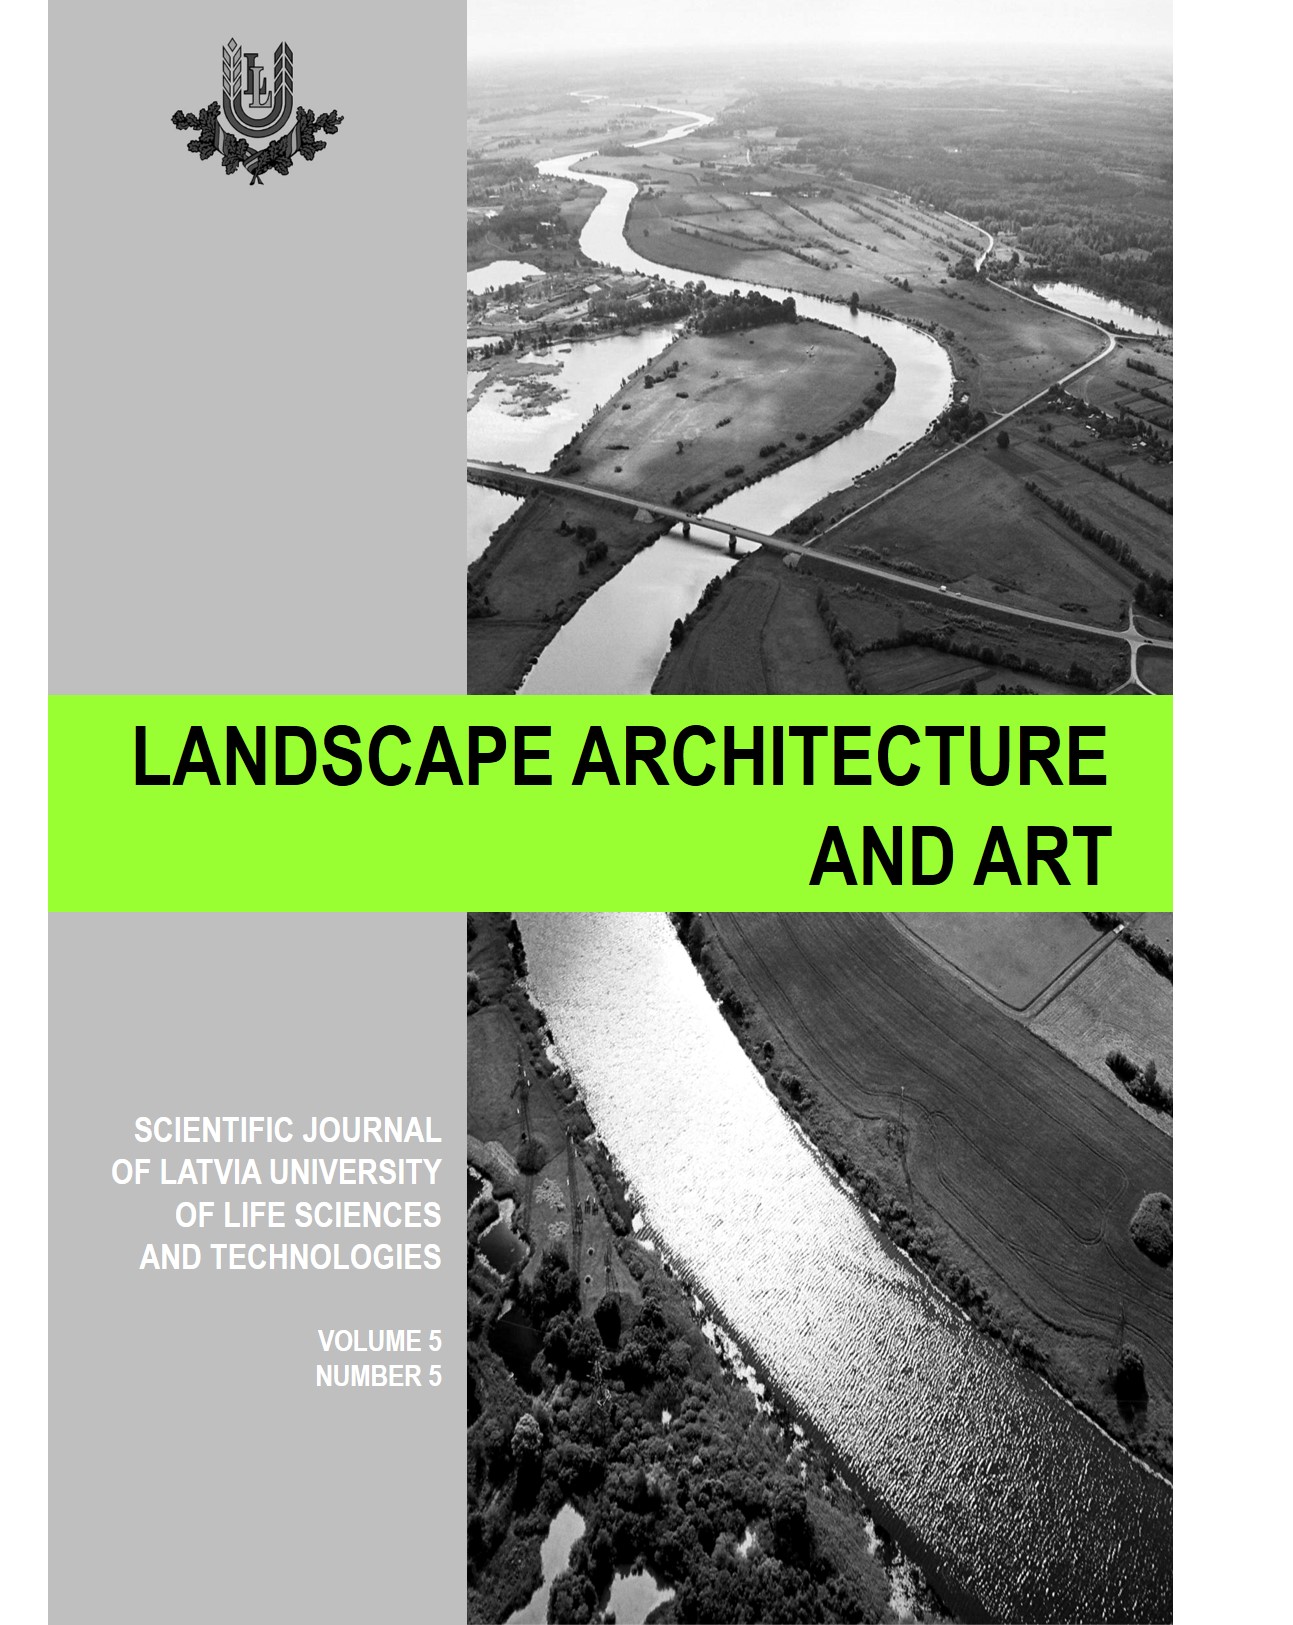 					View Vol. 5 No. 5 (2014): Landscape Architecture and Art, Volume 5, Number 5
				